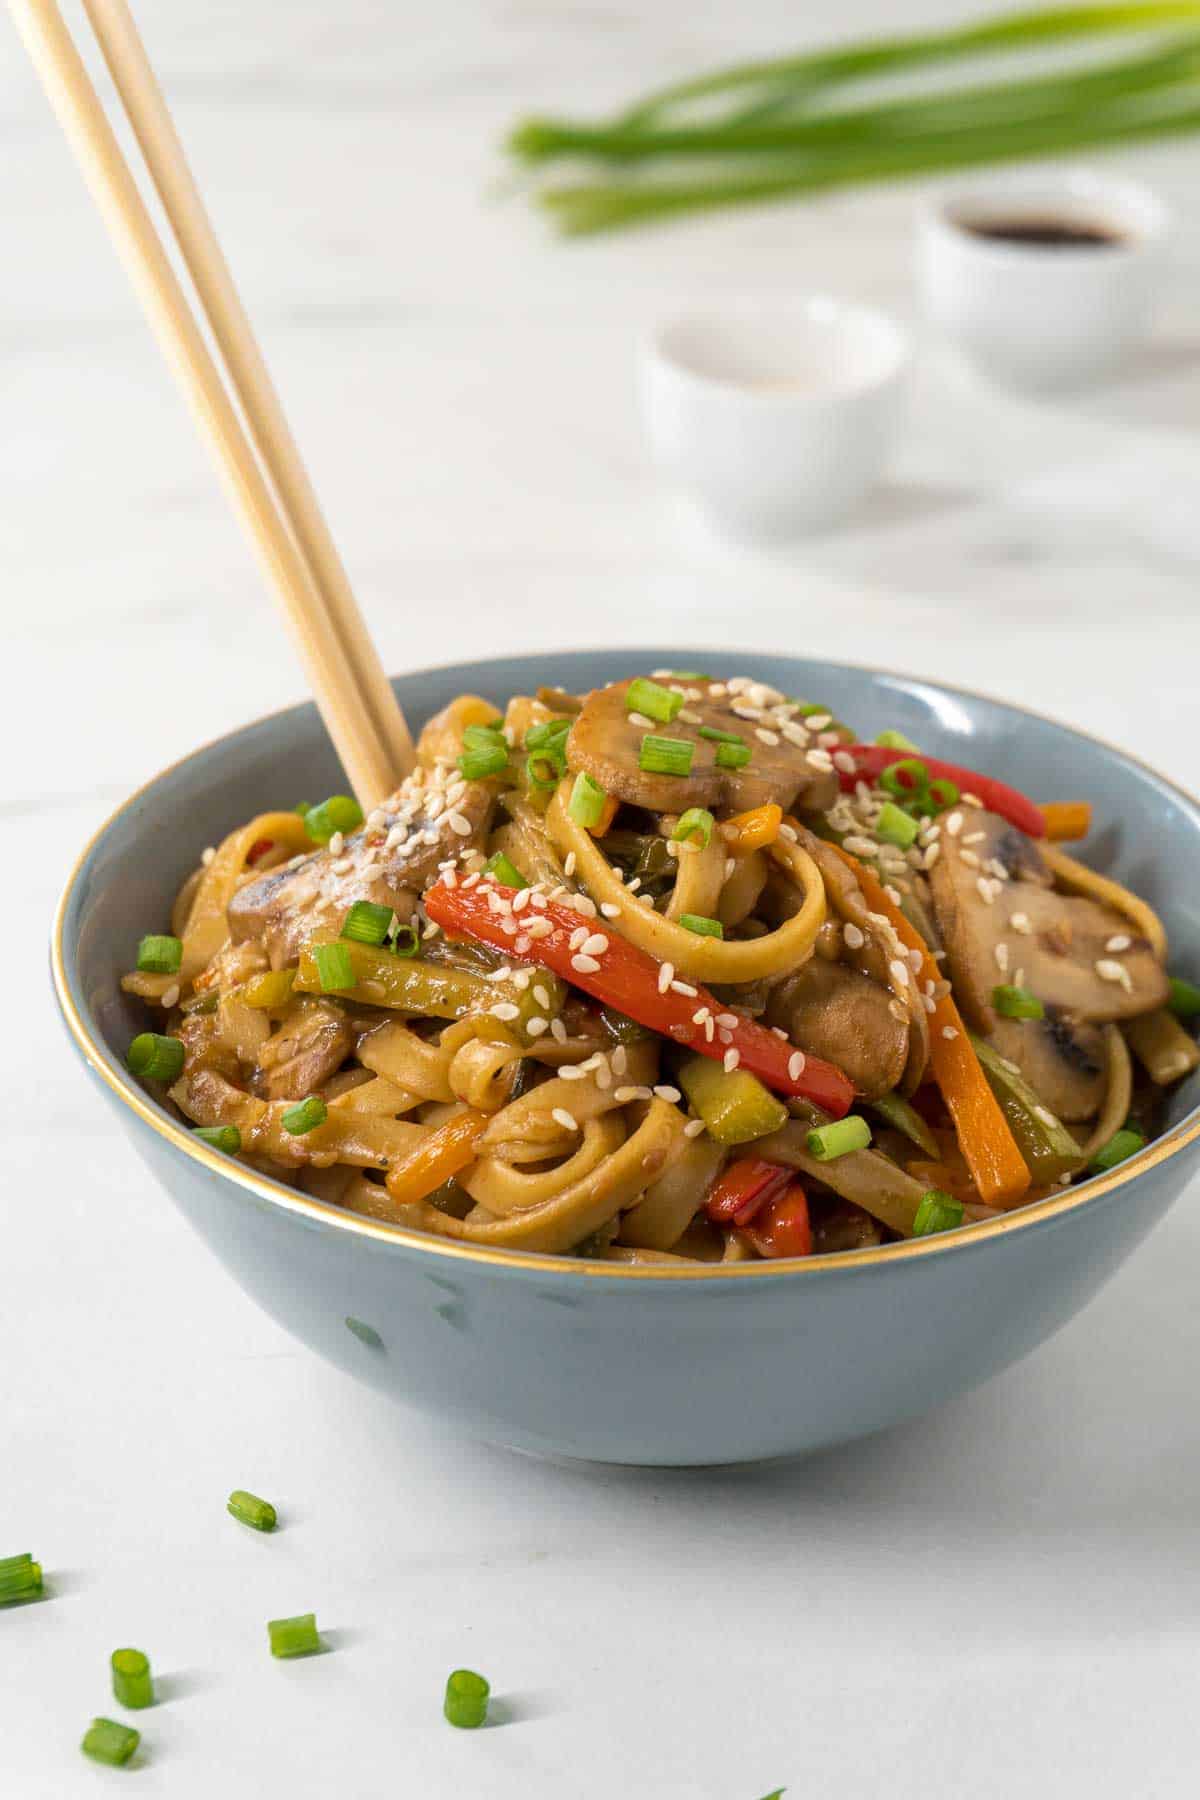 A bowl filled with an Asian-inspired vegetable pasta.